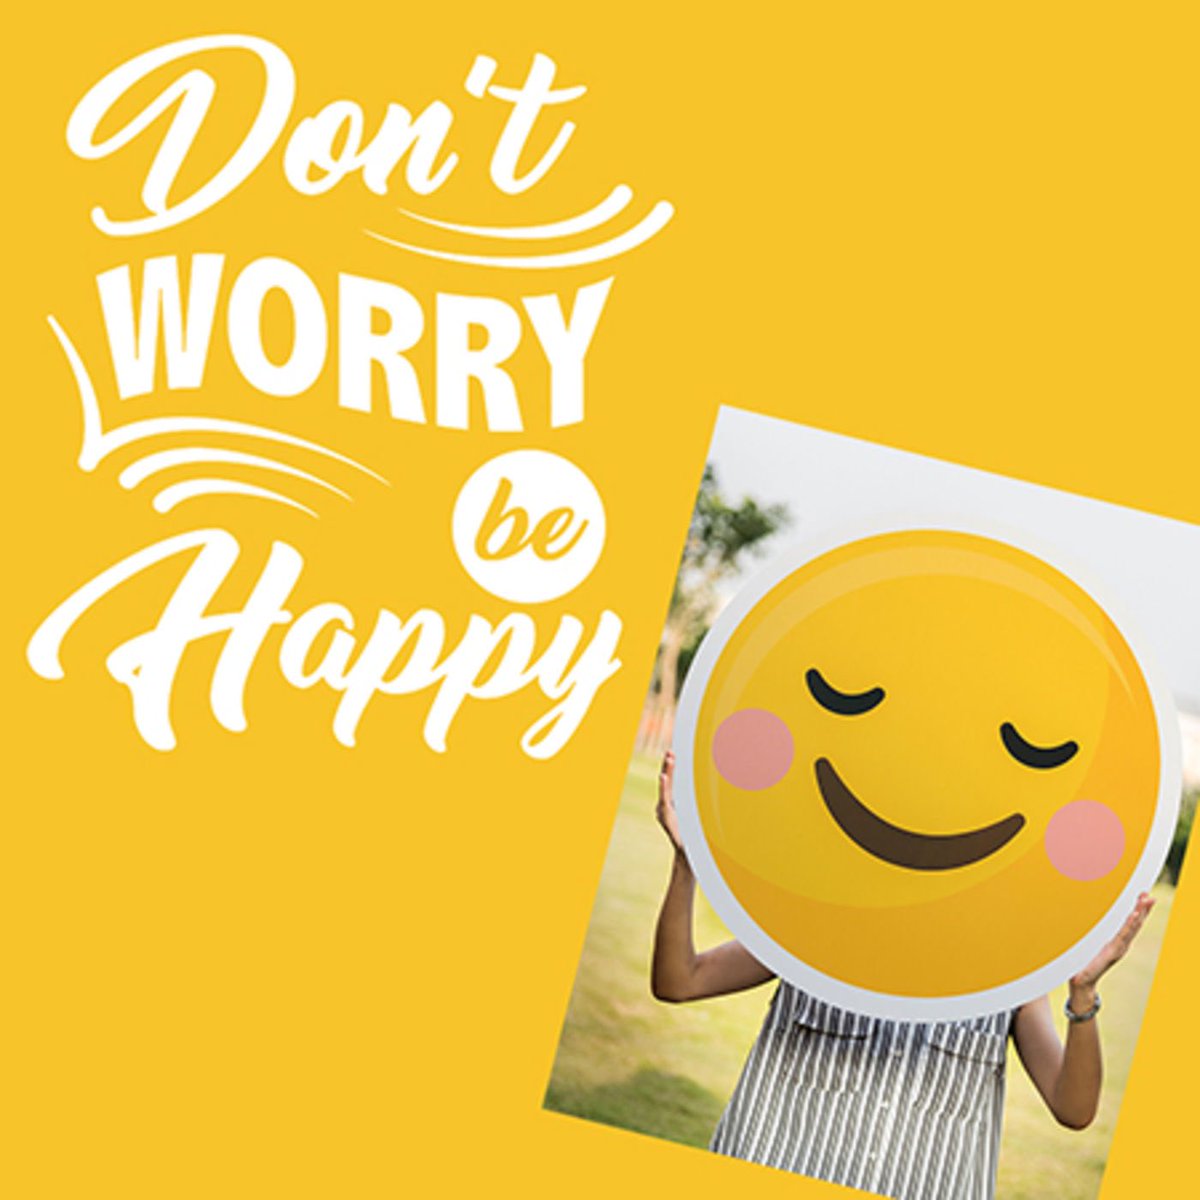 Don t worry dont. Don`t worry be Happy. Don't worry be Happy картинки. Донт вори би Хэппи. Картина don't worry be Happy.